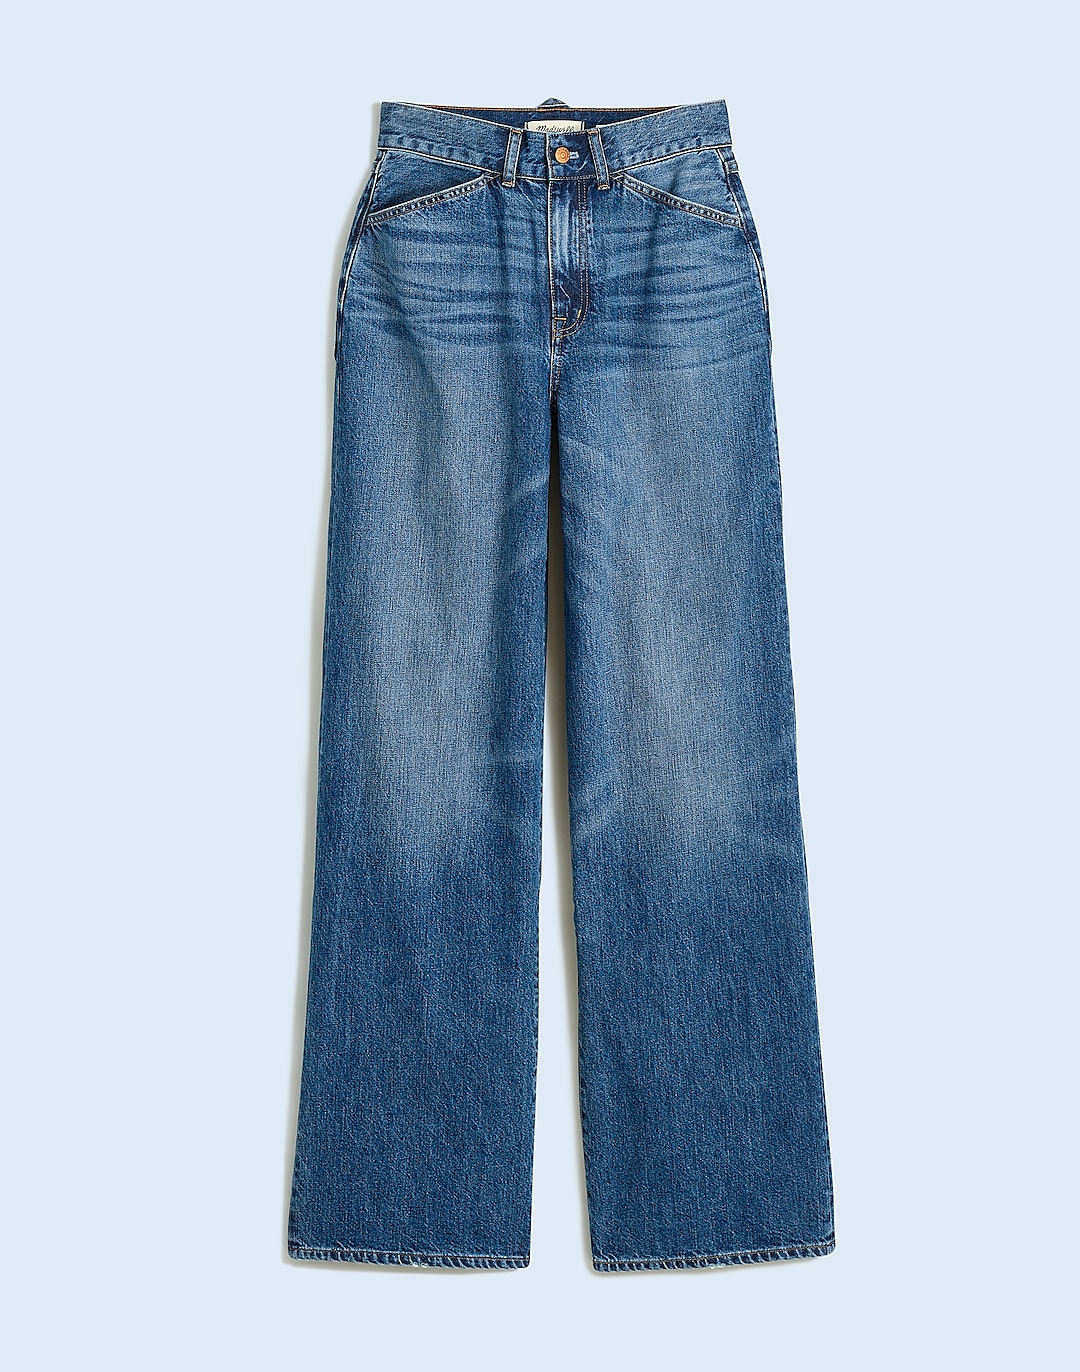 Madewell x Kaihara Superwide-Leg Jeans in Kentshire Wash | Madewell